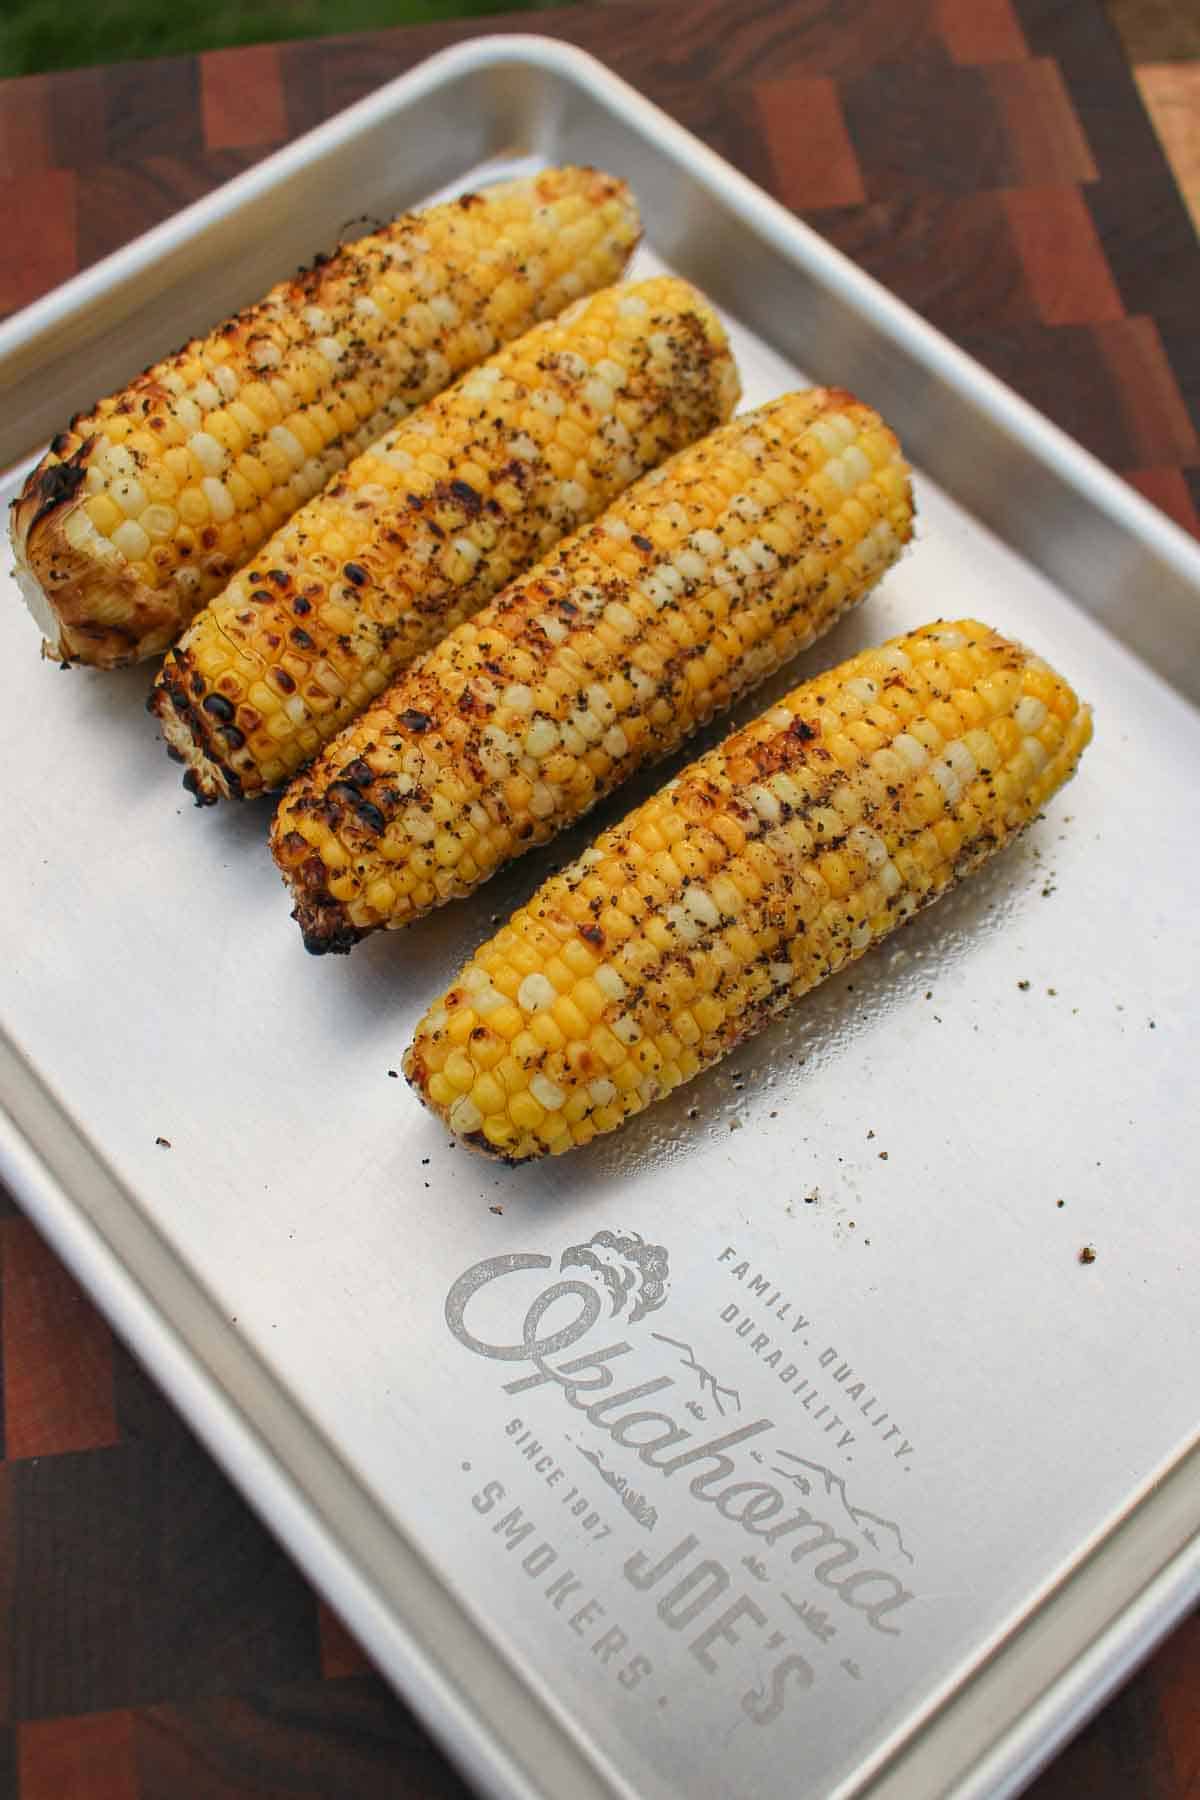 The grilled corn.